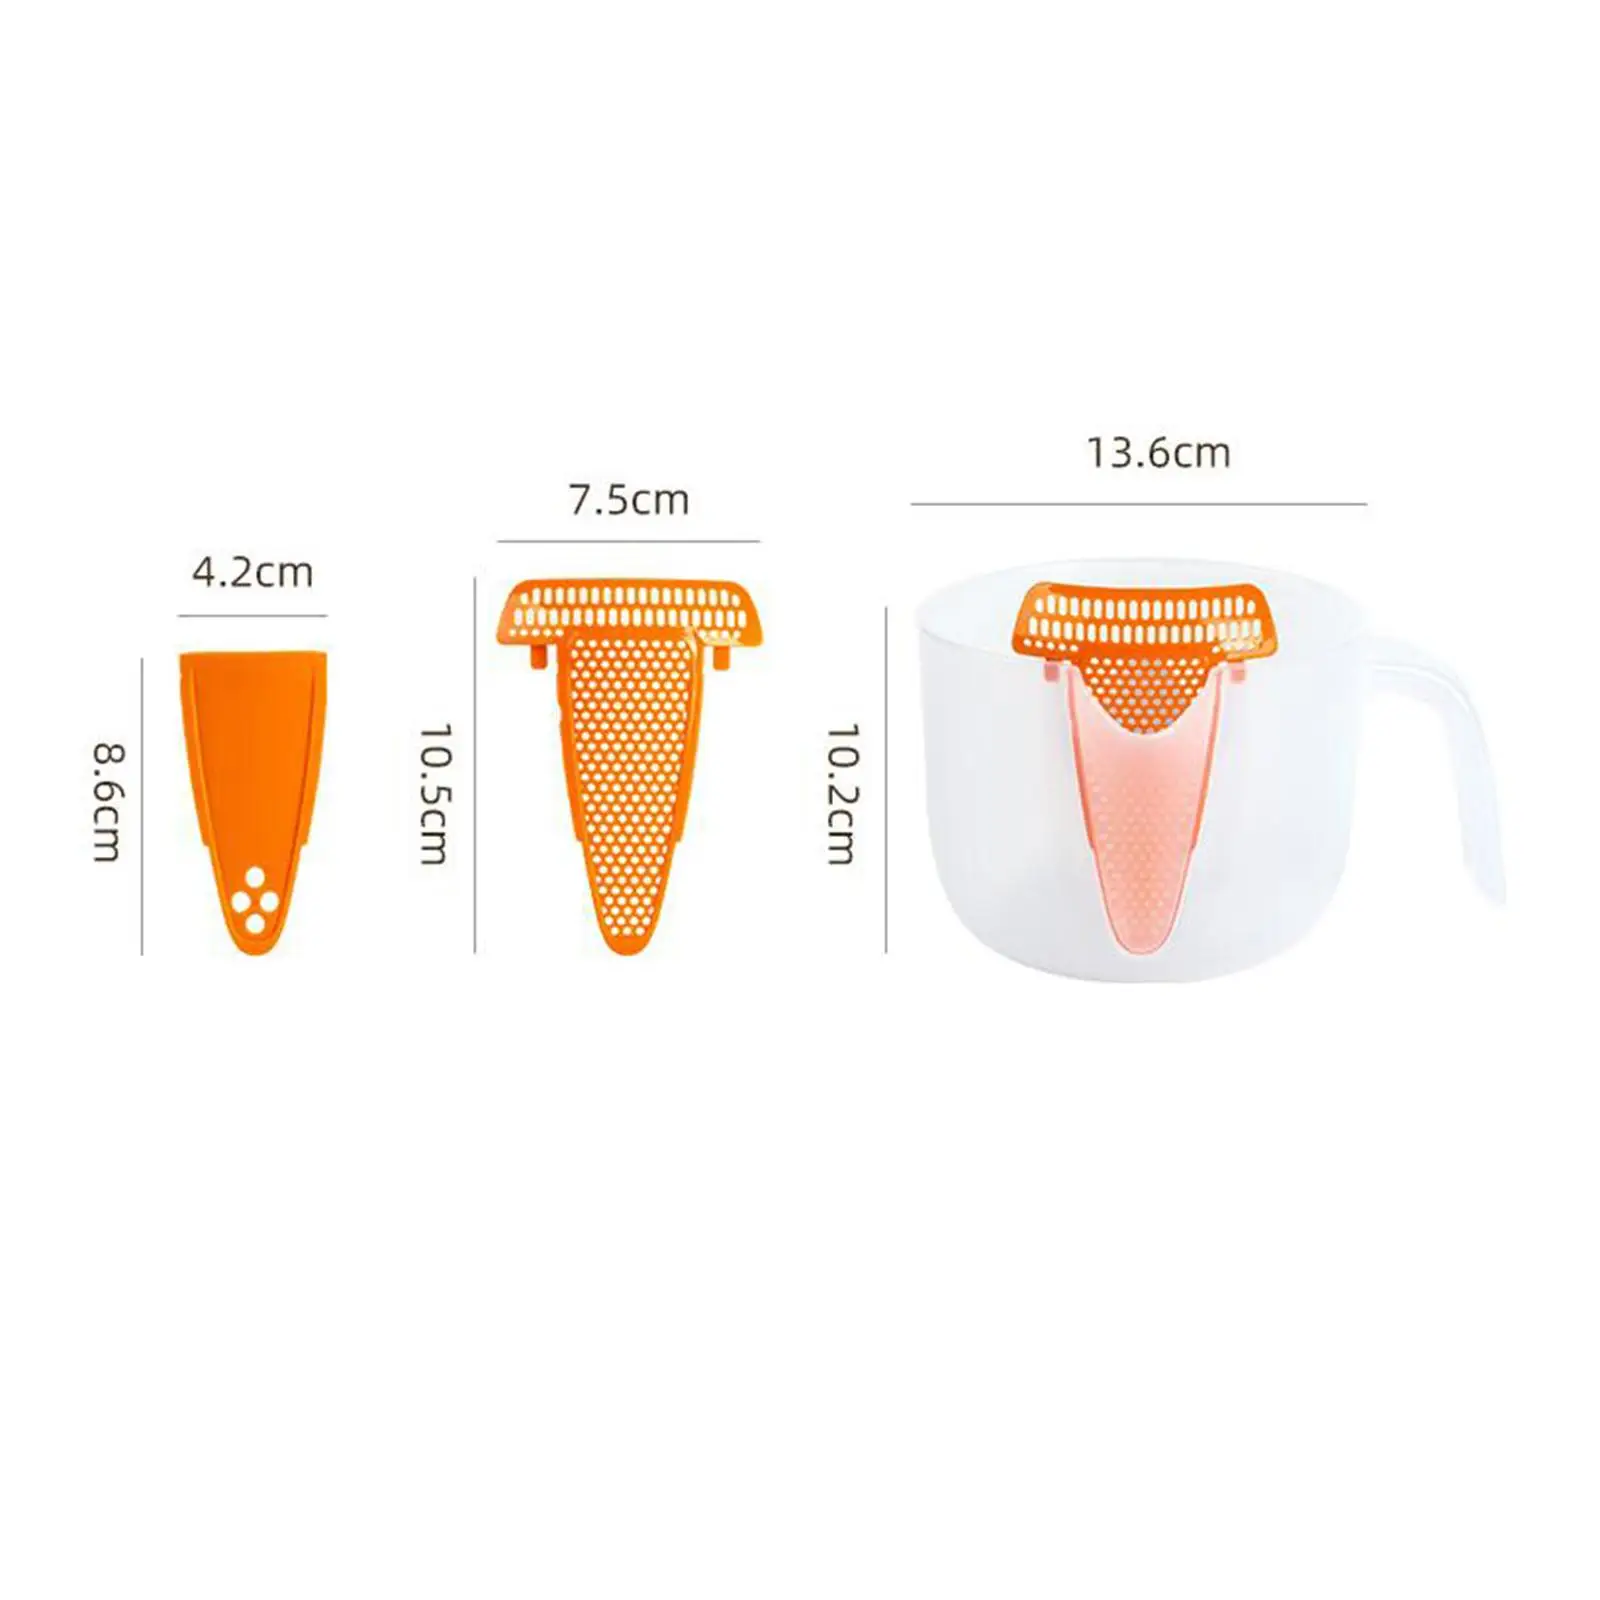 Filter Measuring Cup Pour Spout Easy Clean Kitchen Strainer Cup Baking Tools